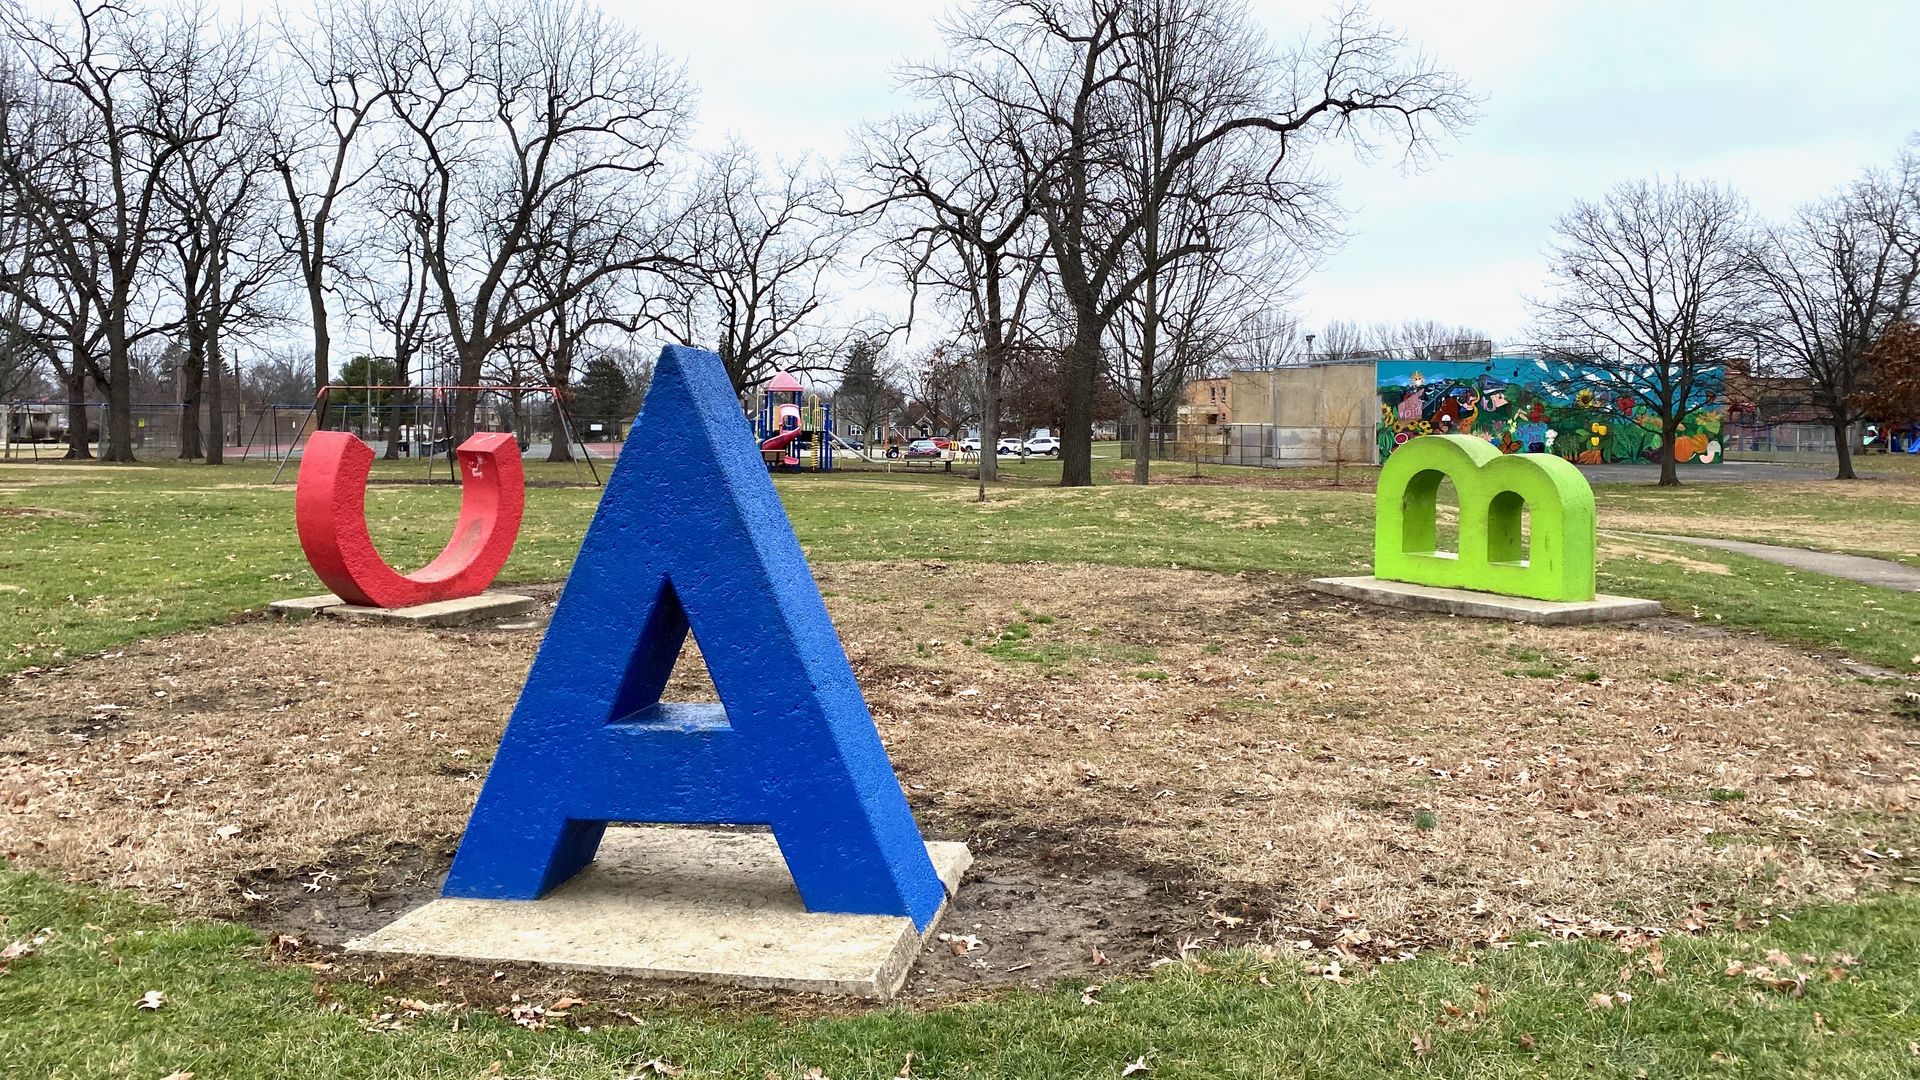 Large sculptures of a blue "A" straight up and a green "B" and red "C" on their sides